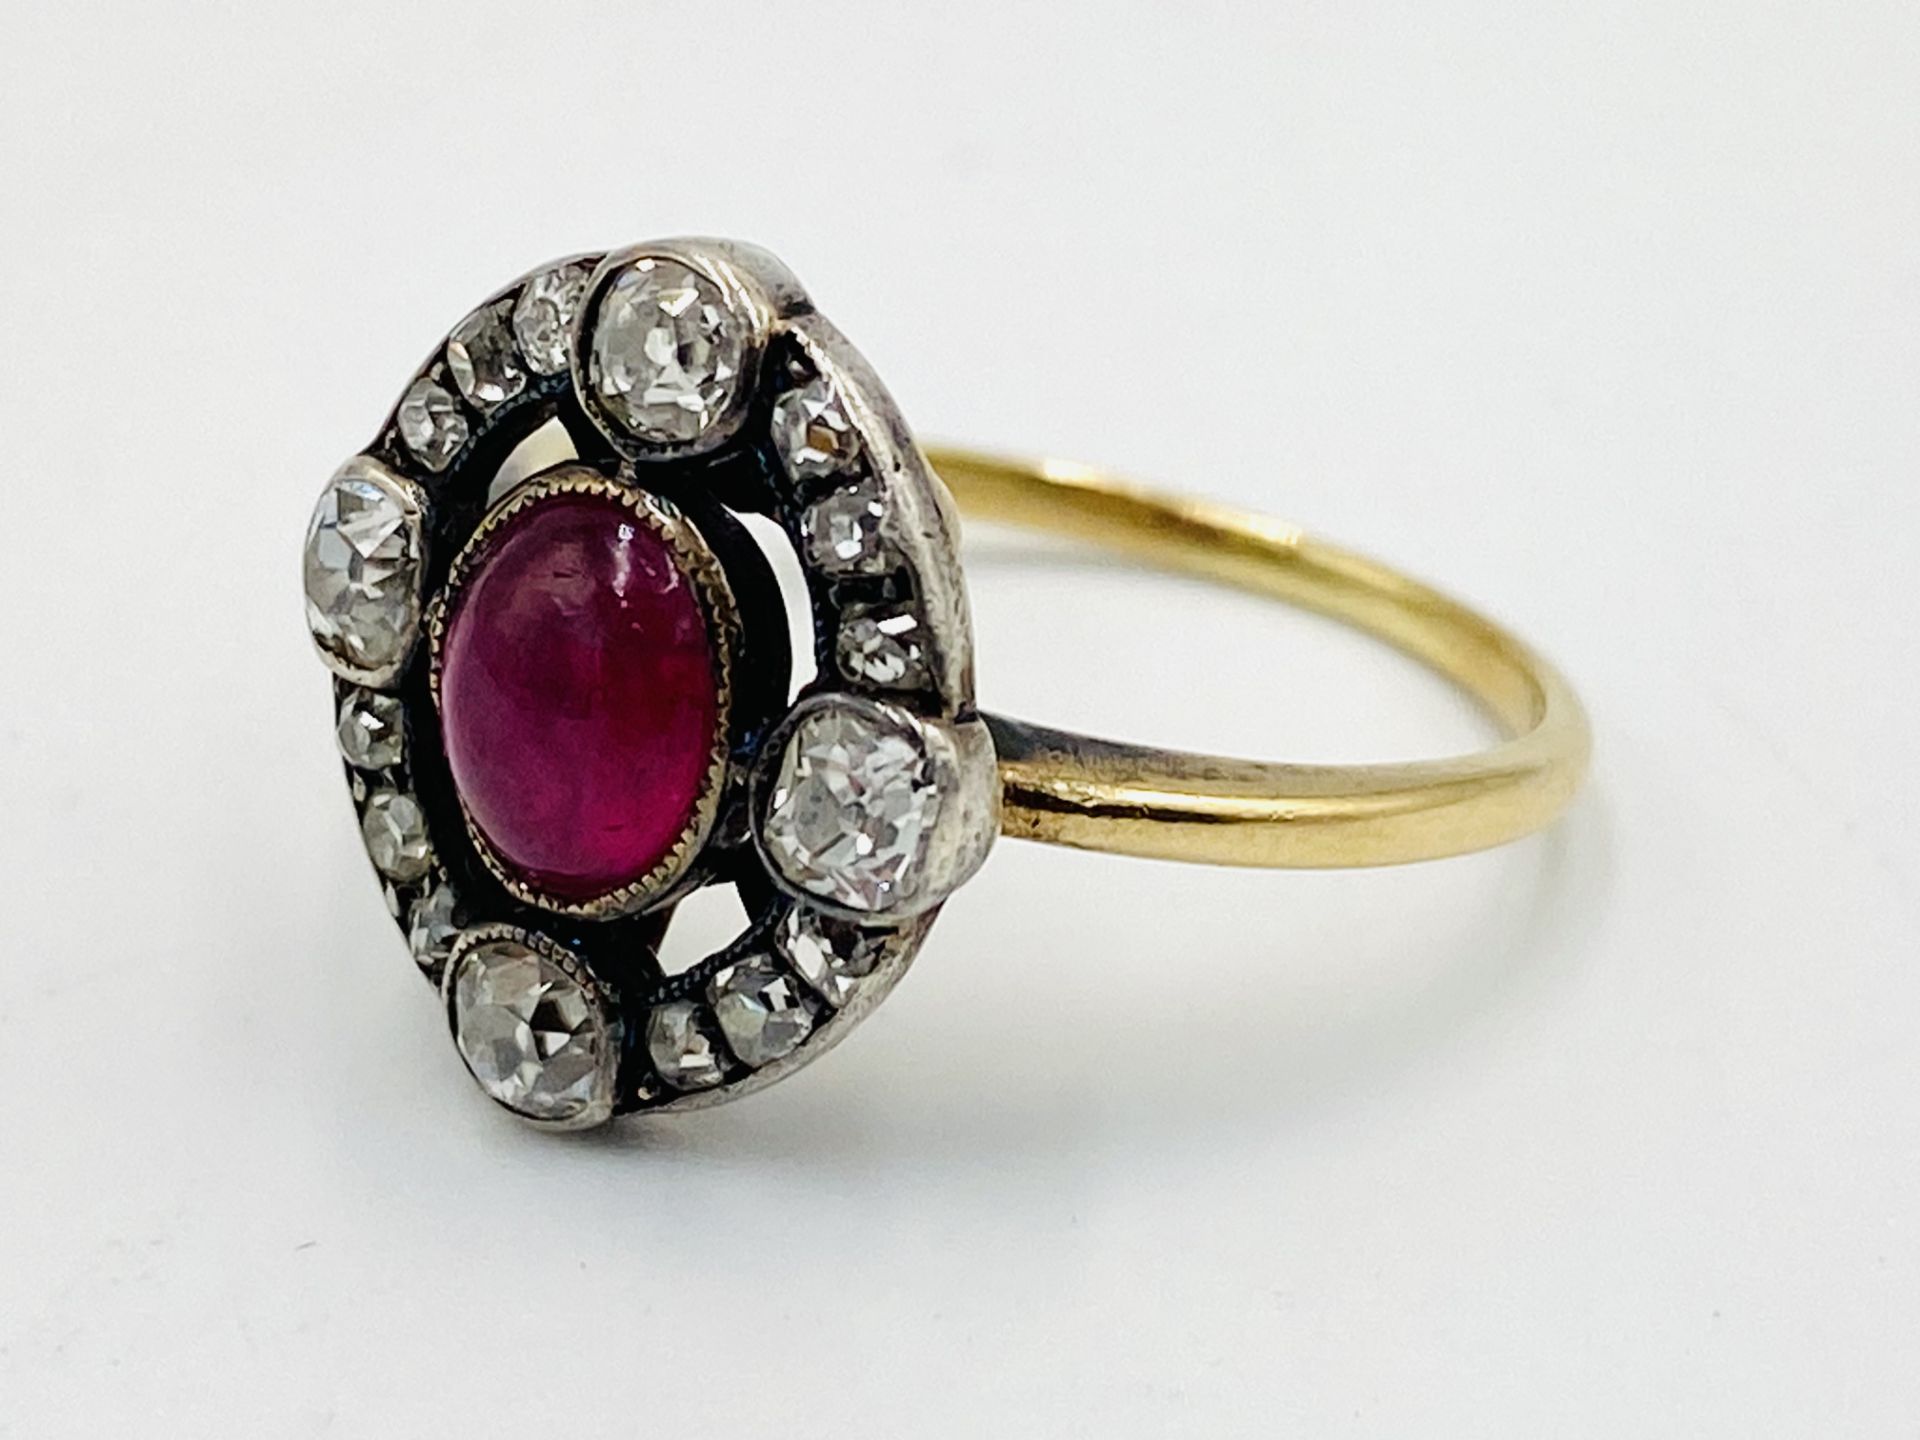 Gold ring set with a centre ruby and diamond surround - Image 2 of 4